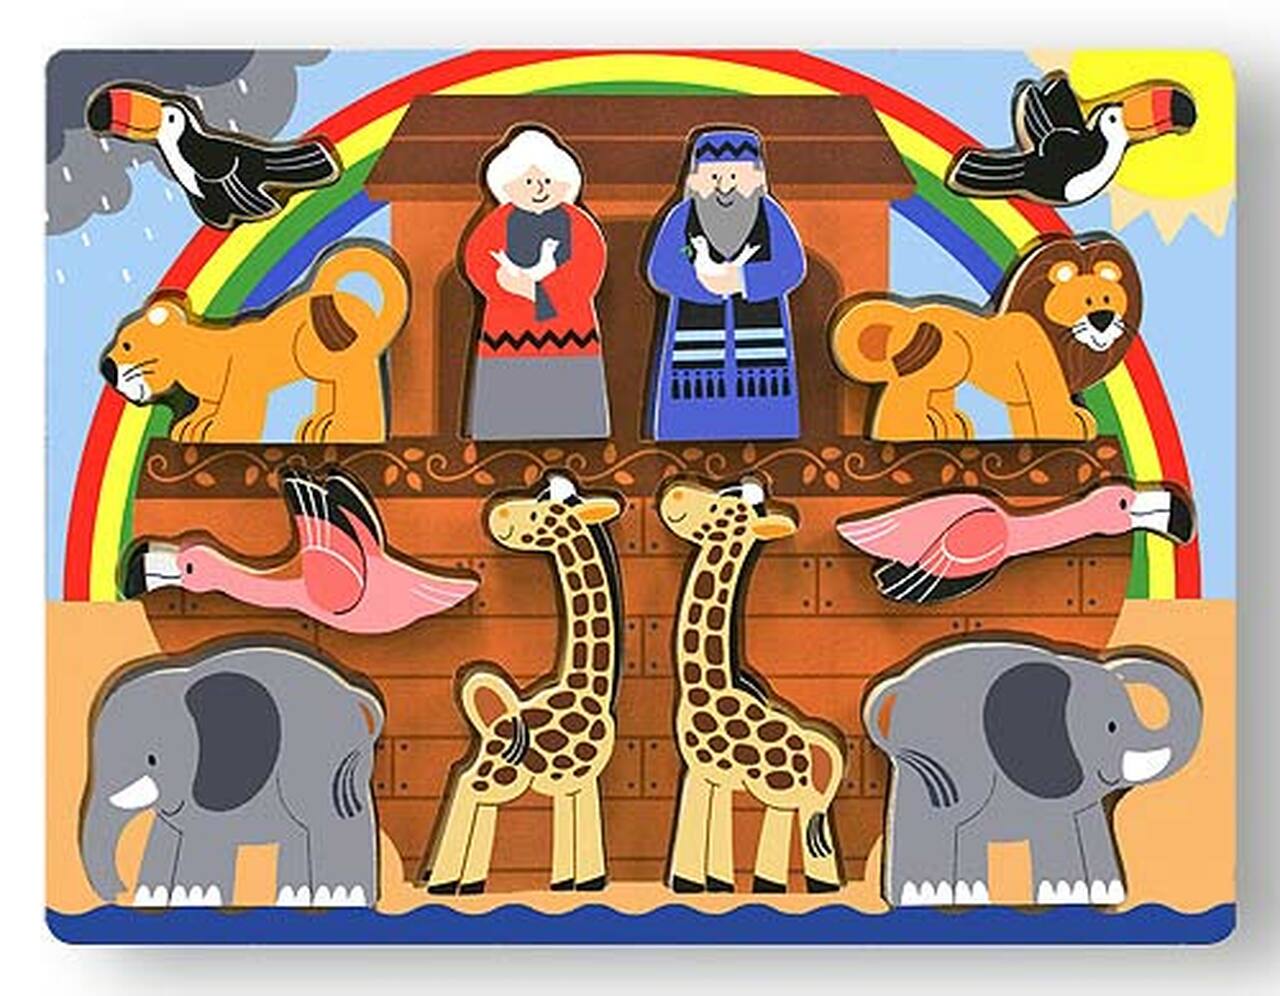 Melissa & Doug Chunky Puzzle Noah's Ark  000772037167 Wooden Chunky Puzzle Ages 3+